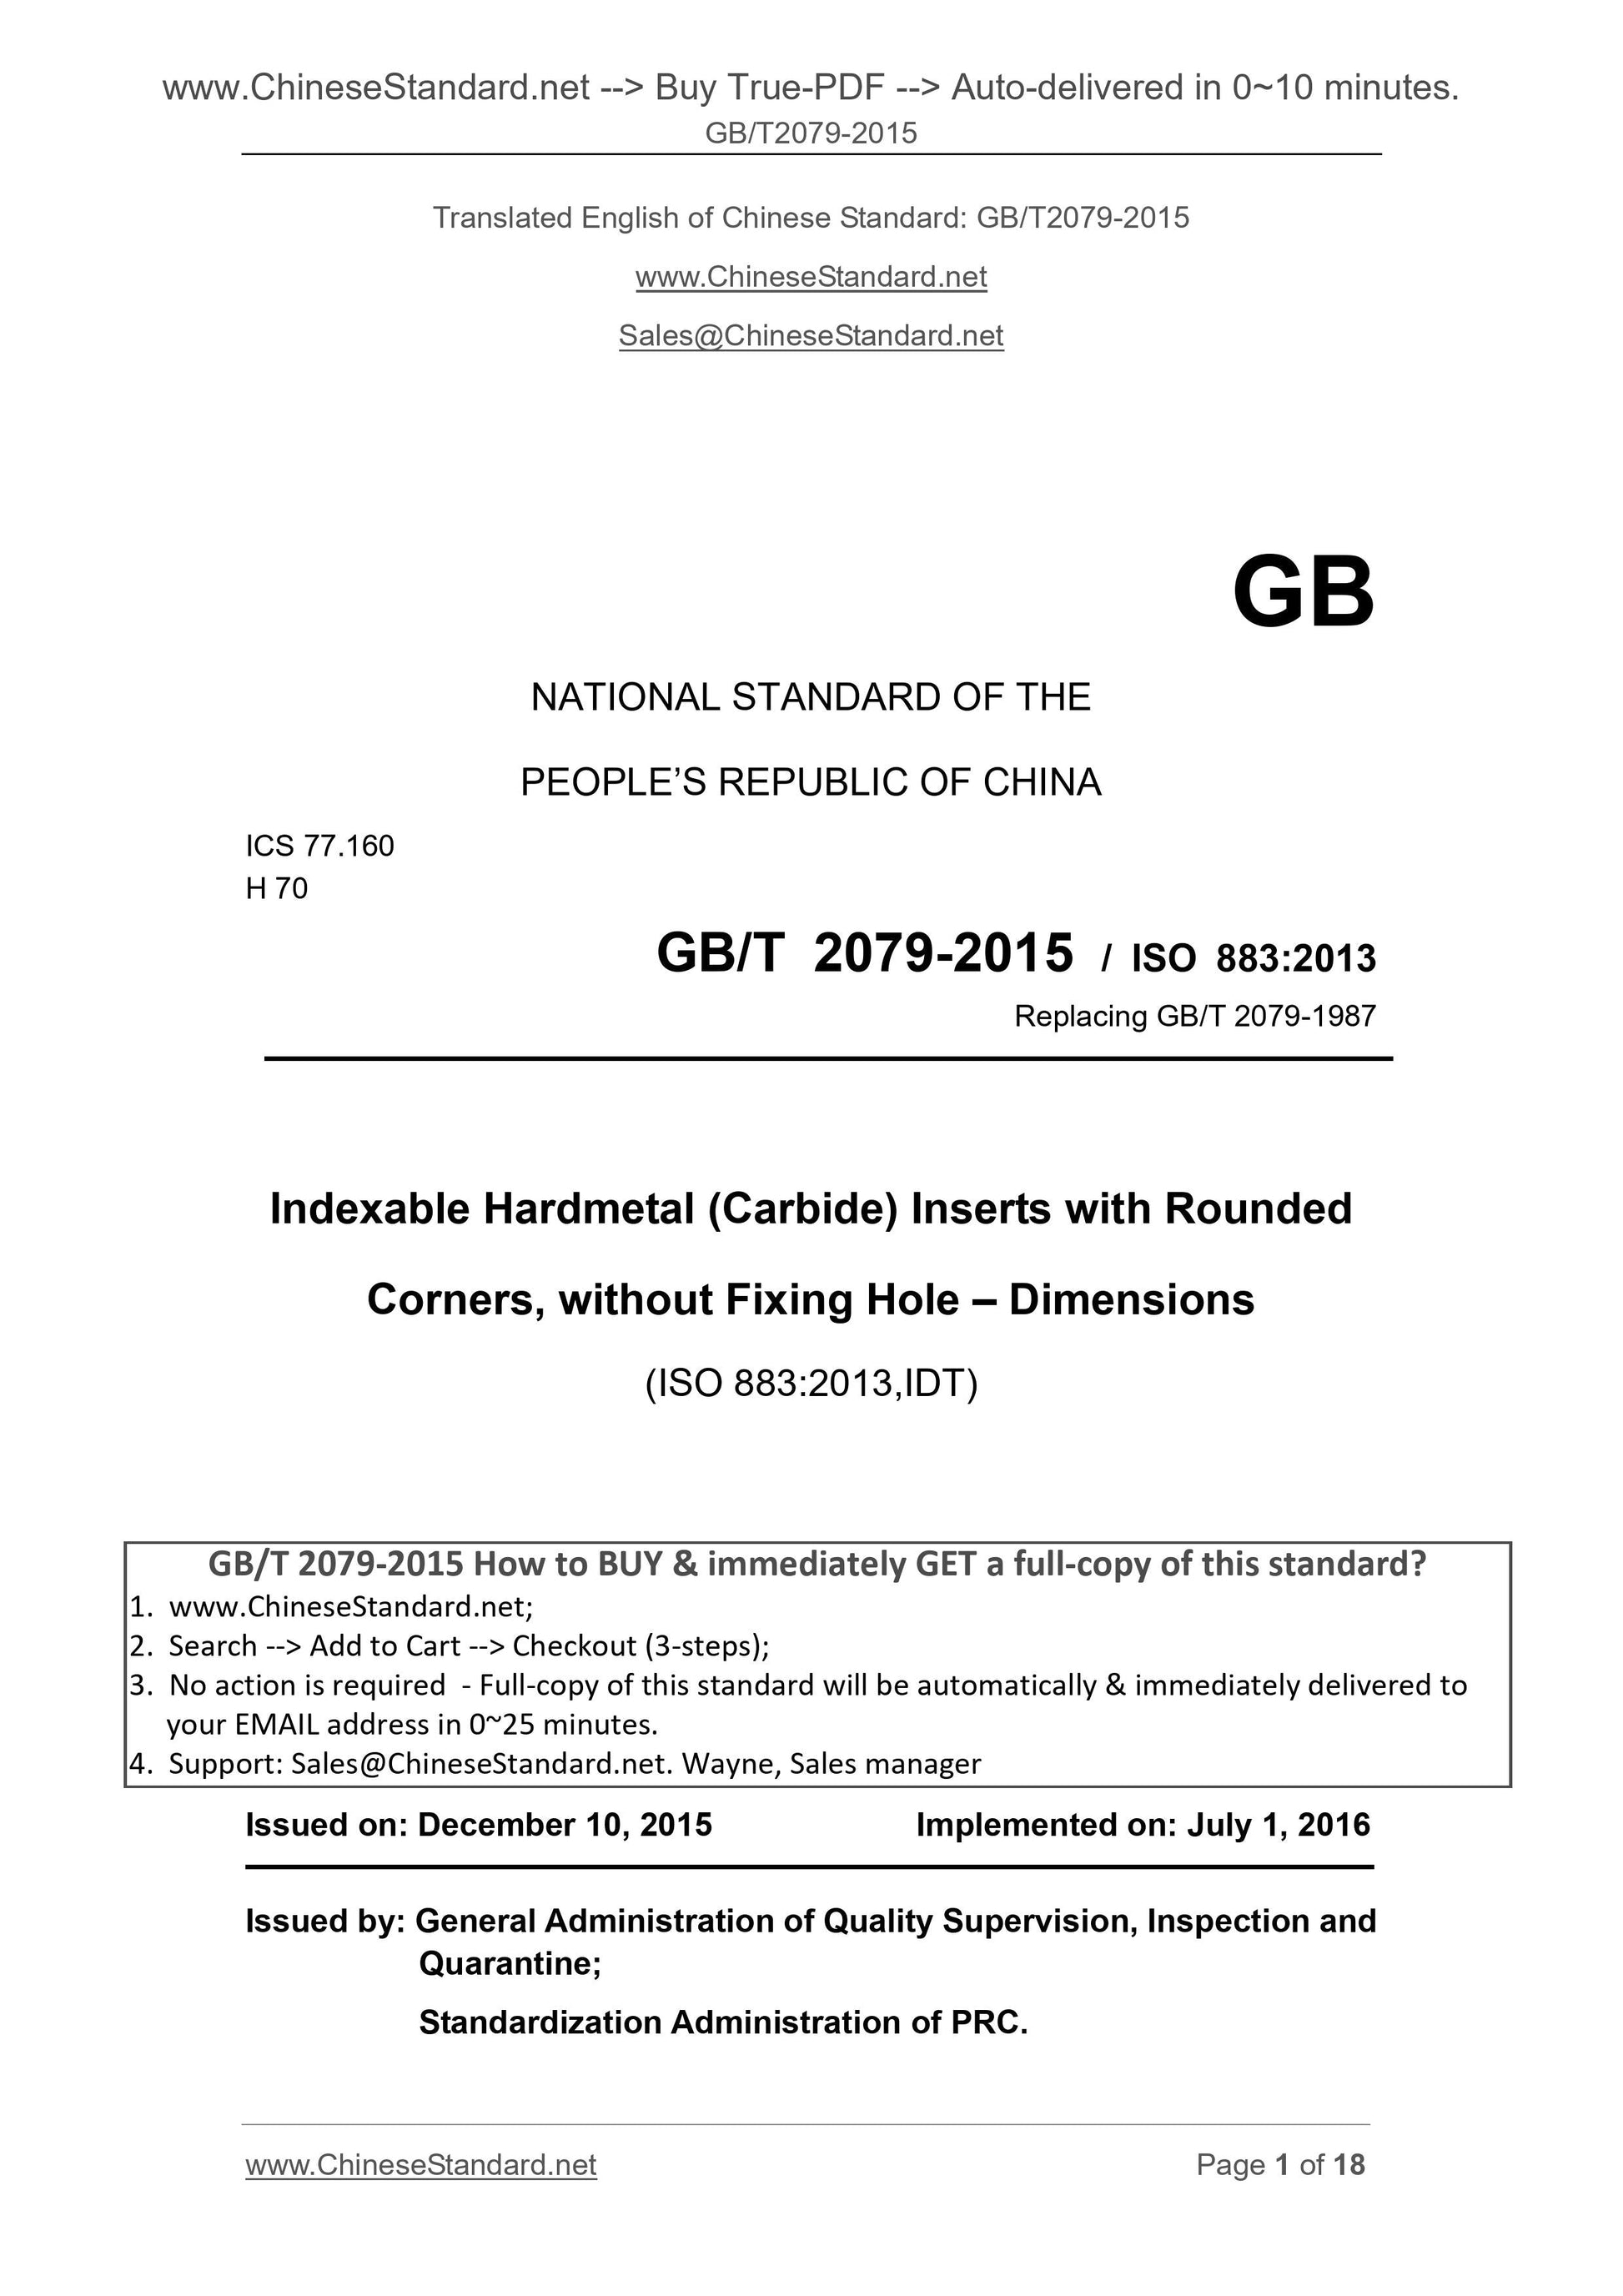 GB/T 2079-2015 Page 1